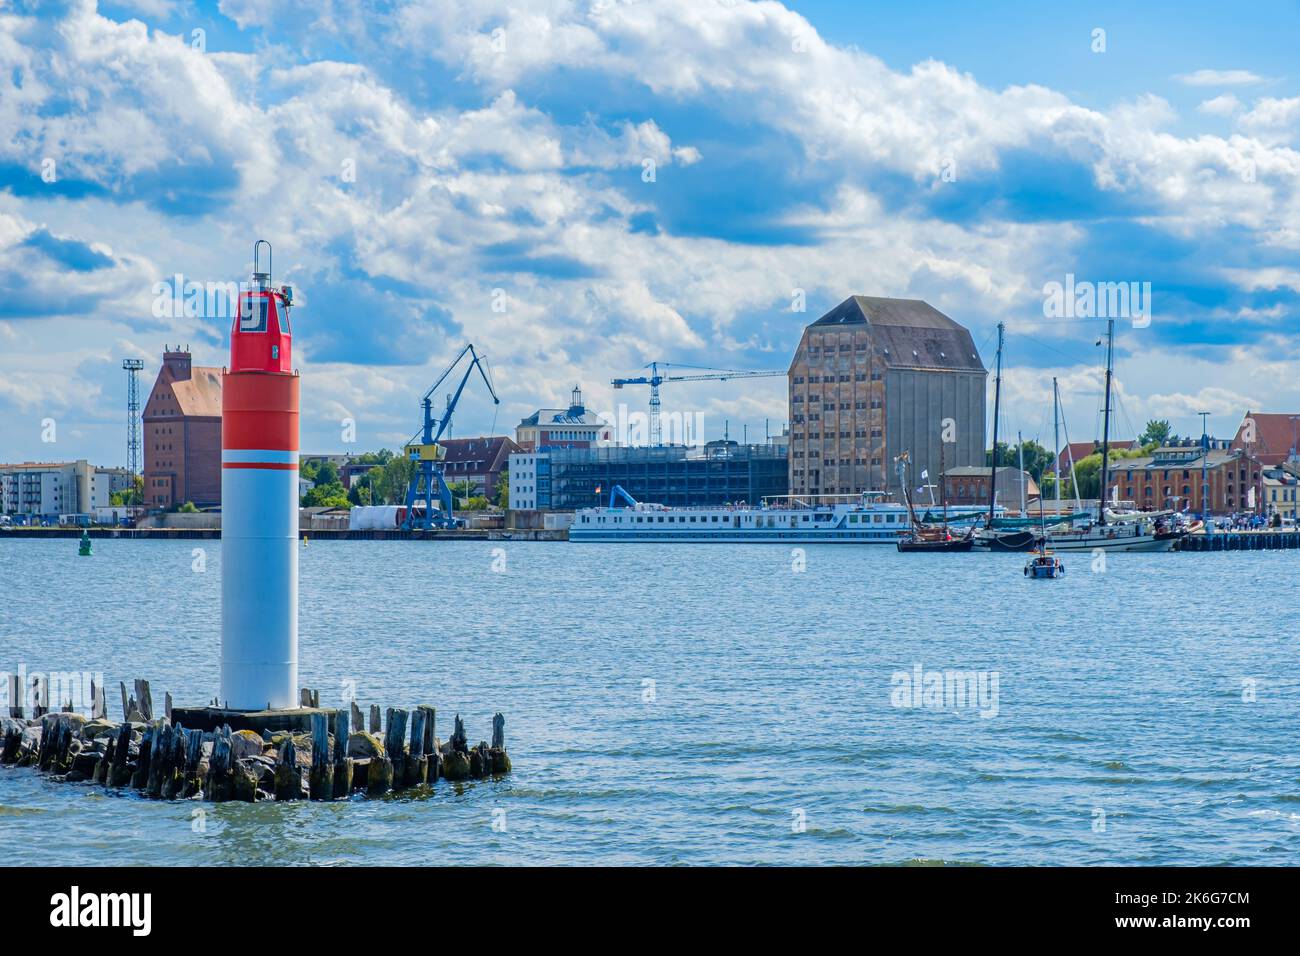 Seaside view from the Strela Sound onto the central breakwater light, the town backdrop and harbour front of the Hanseatic Town of Stralsund, Germany. Stock Photo